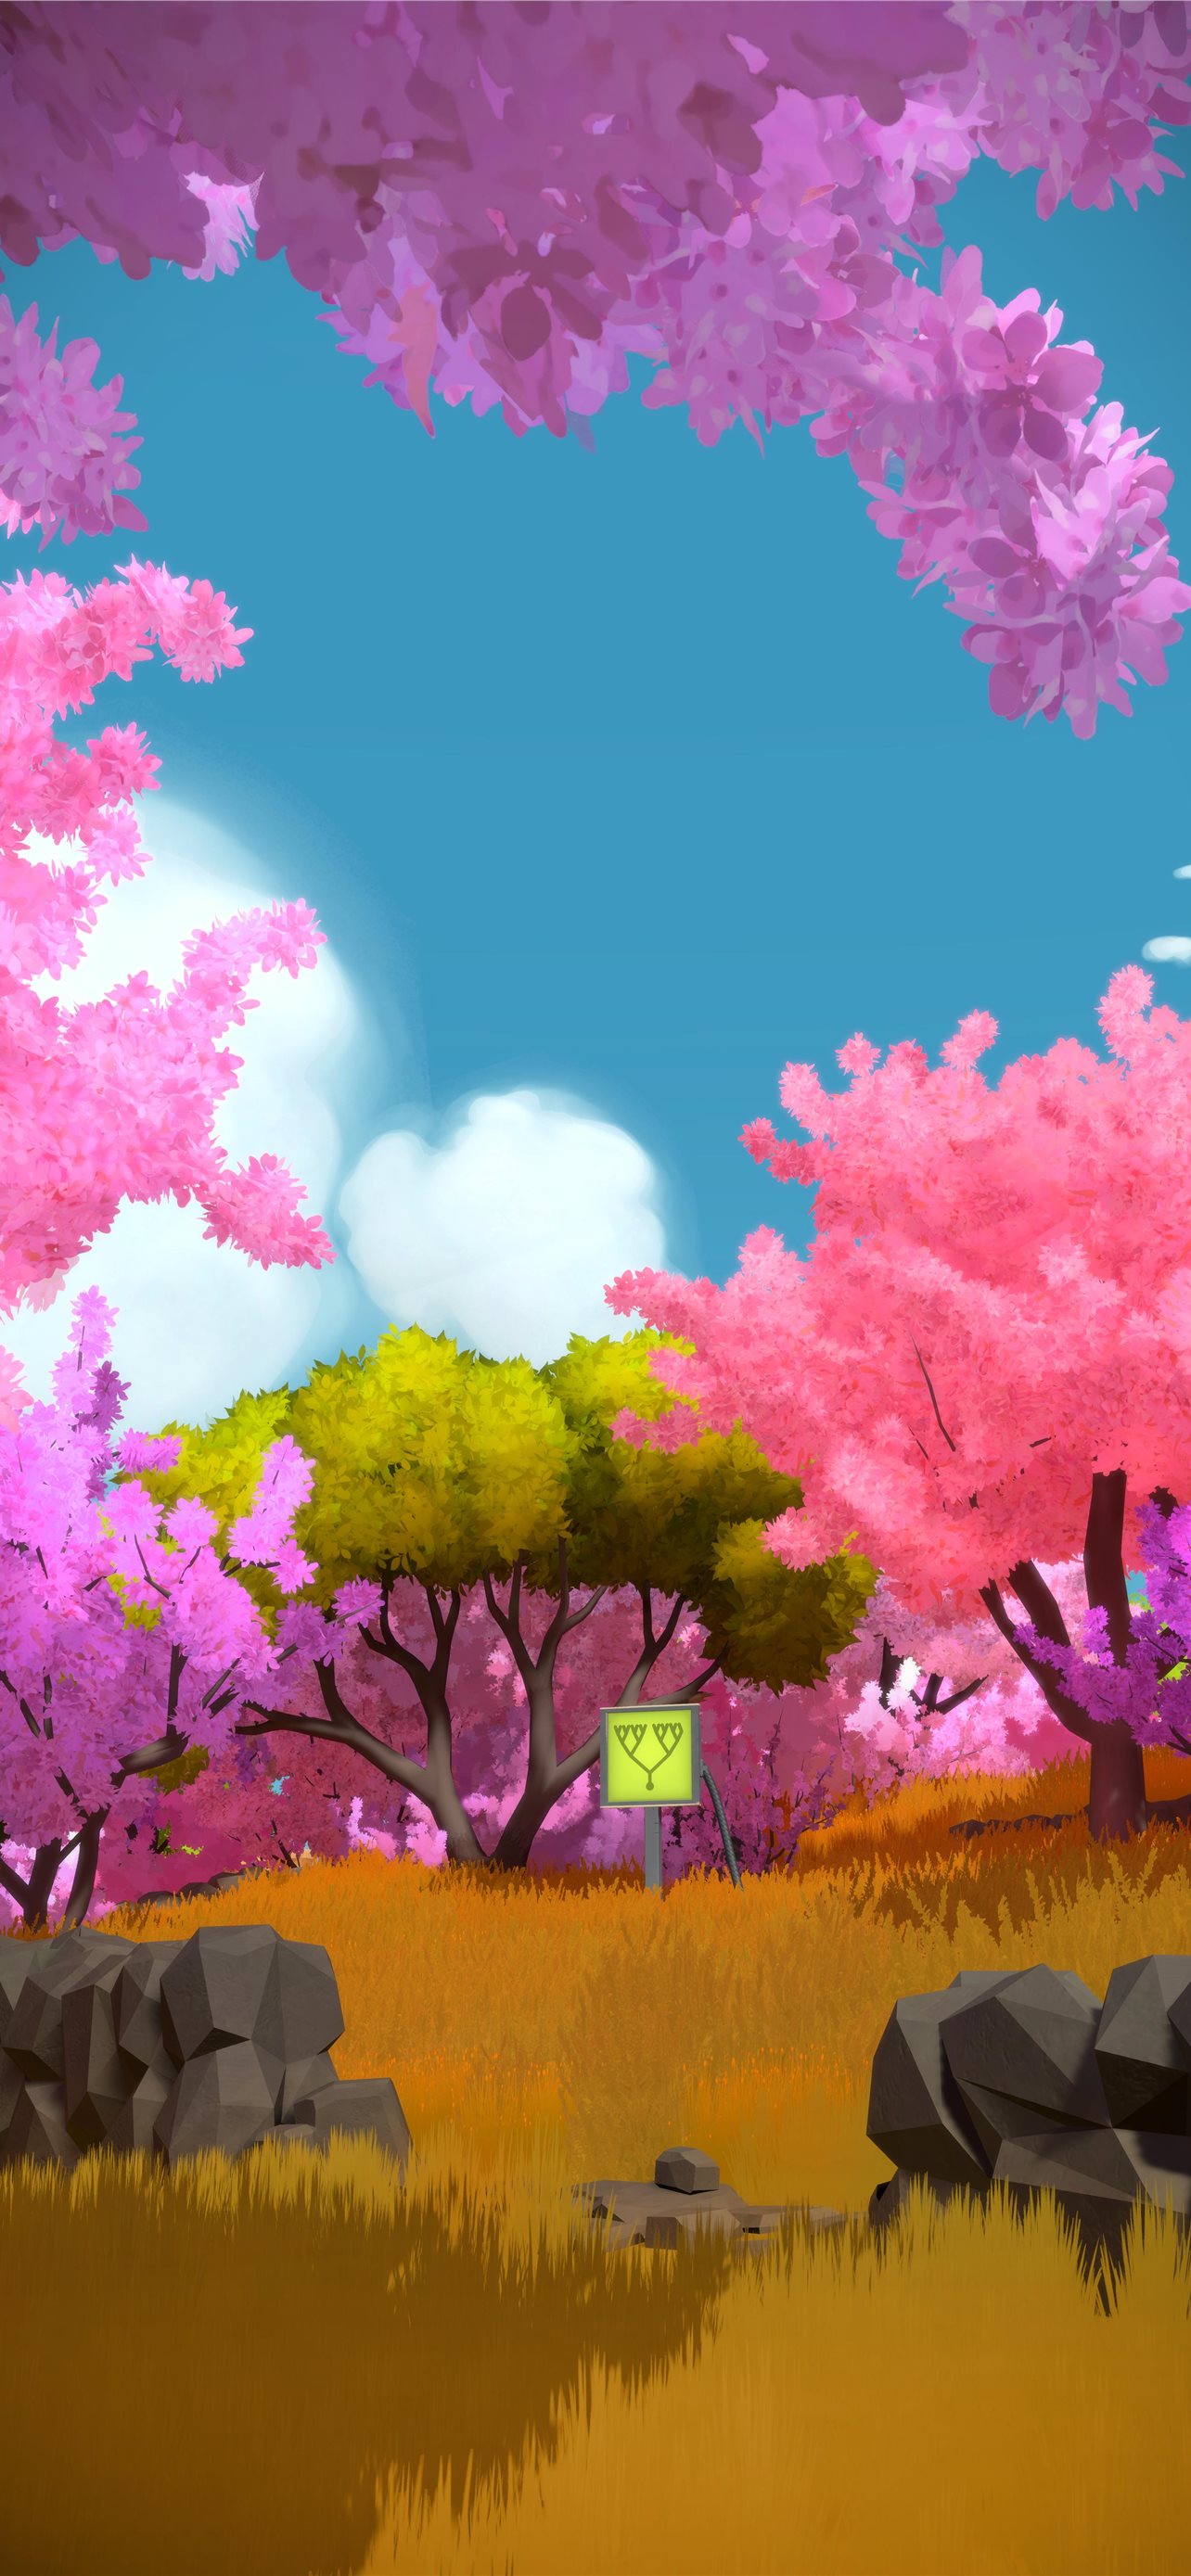 Best the witness game iphone hd wallpapers